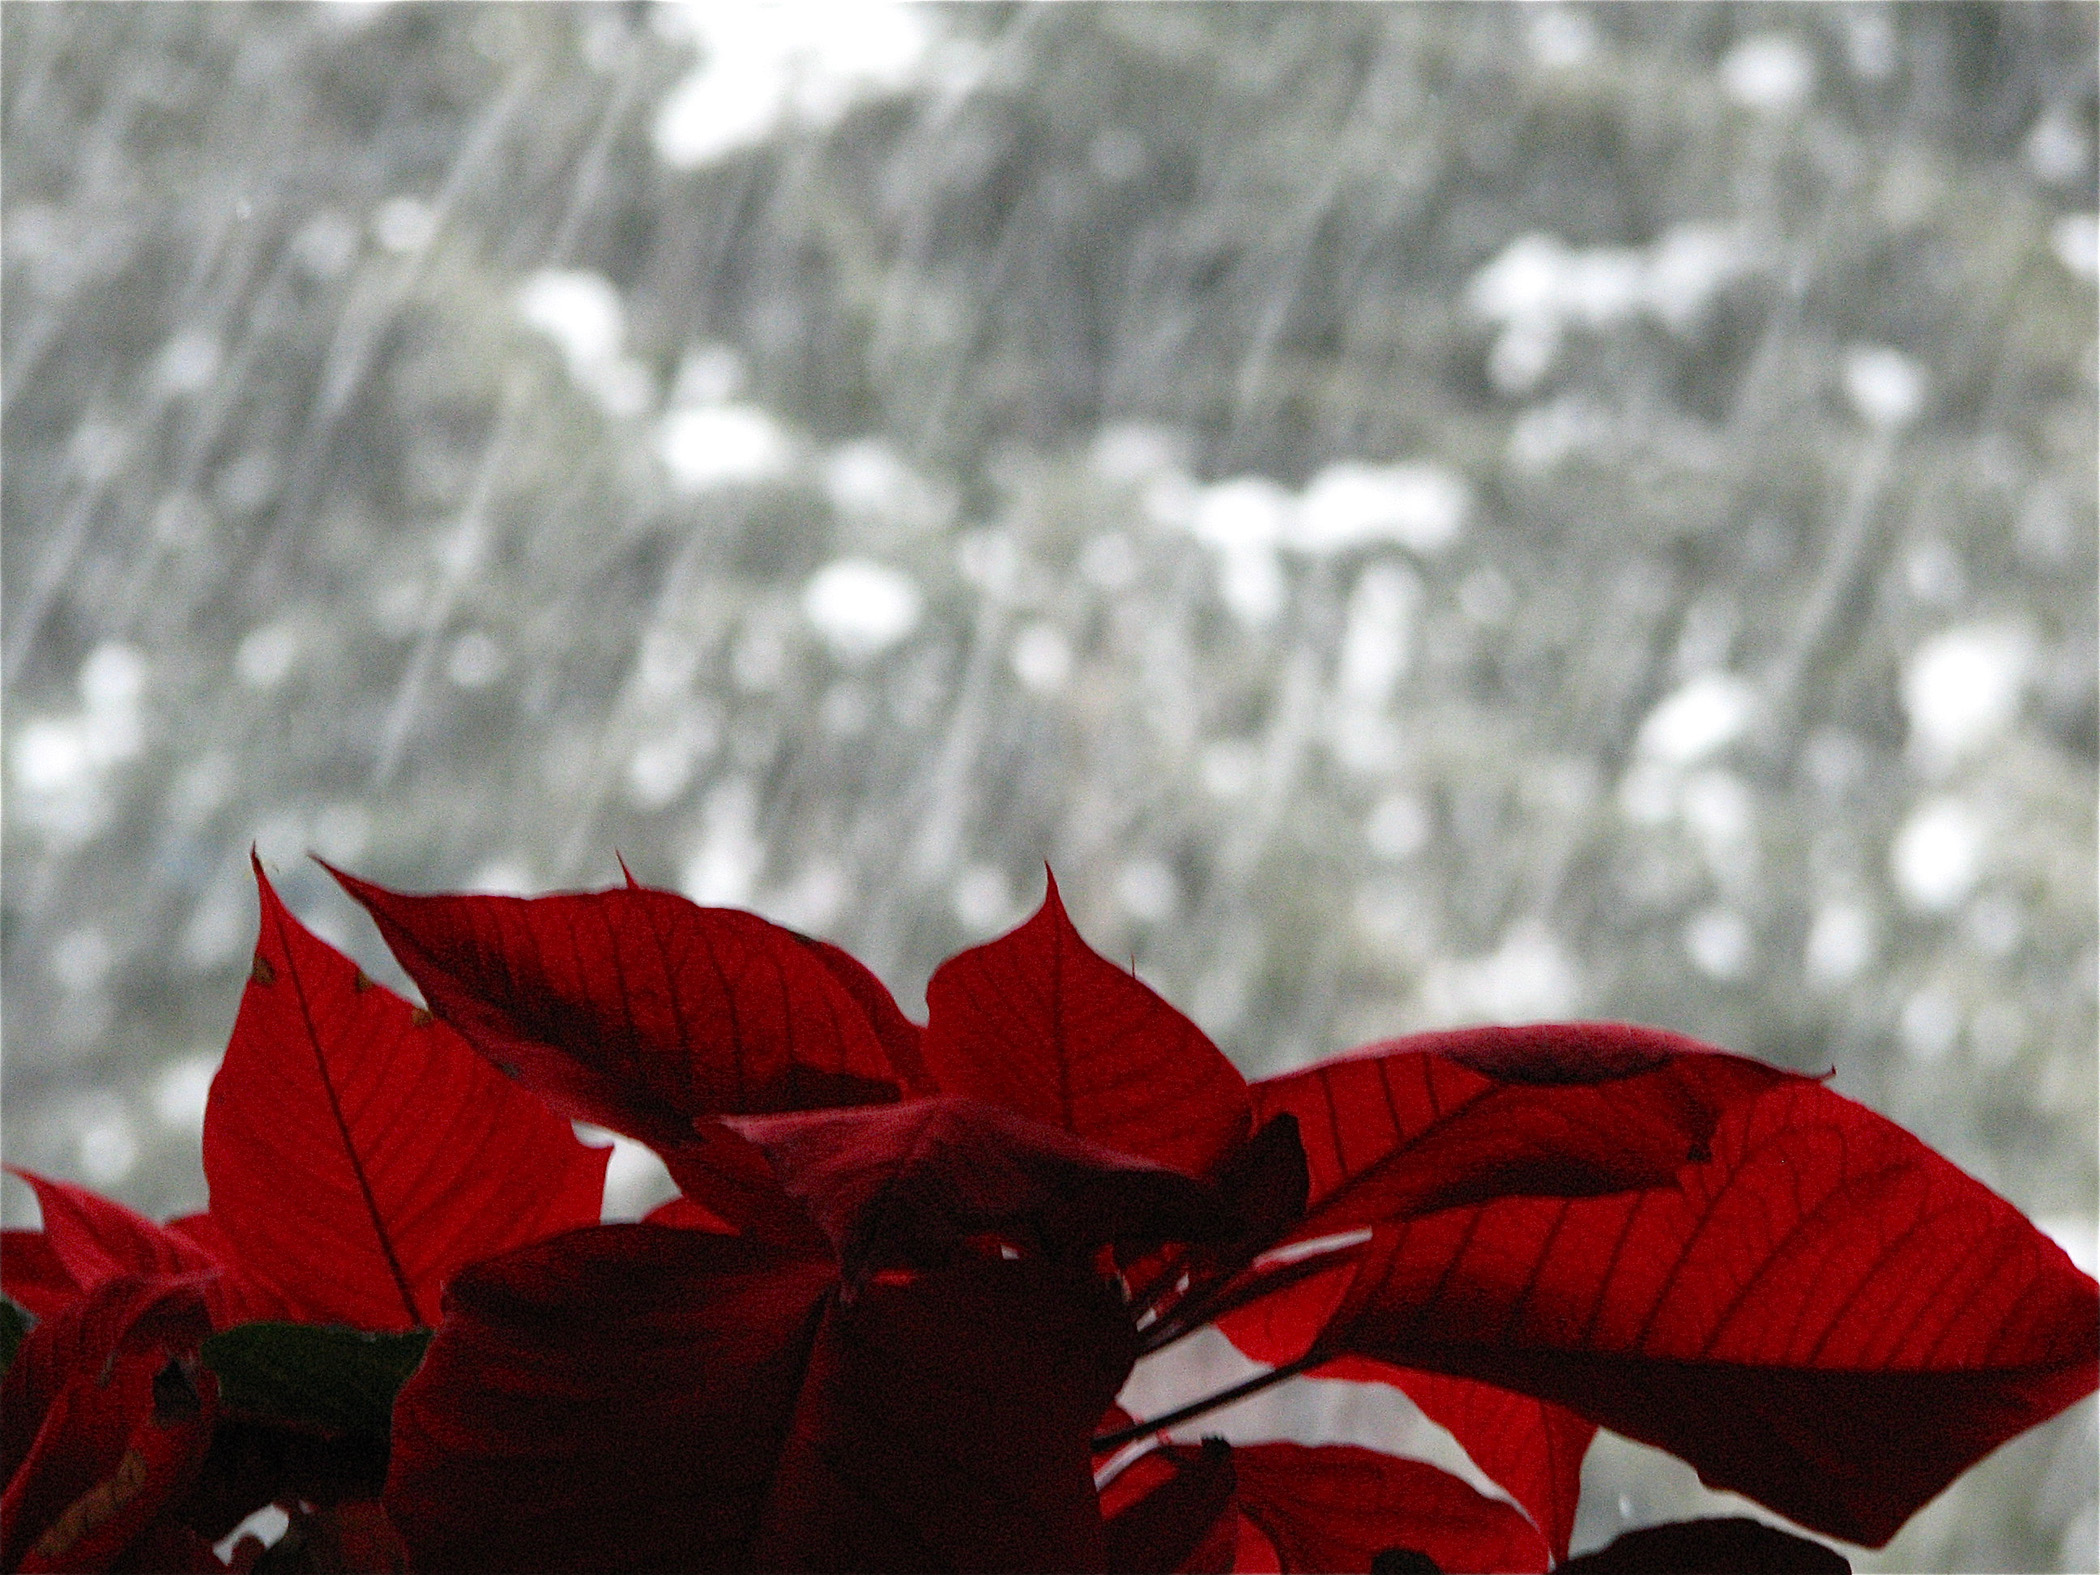 Pointsettia In A Winter Window, Vernon, Vt (user submitted)